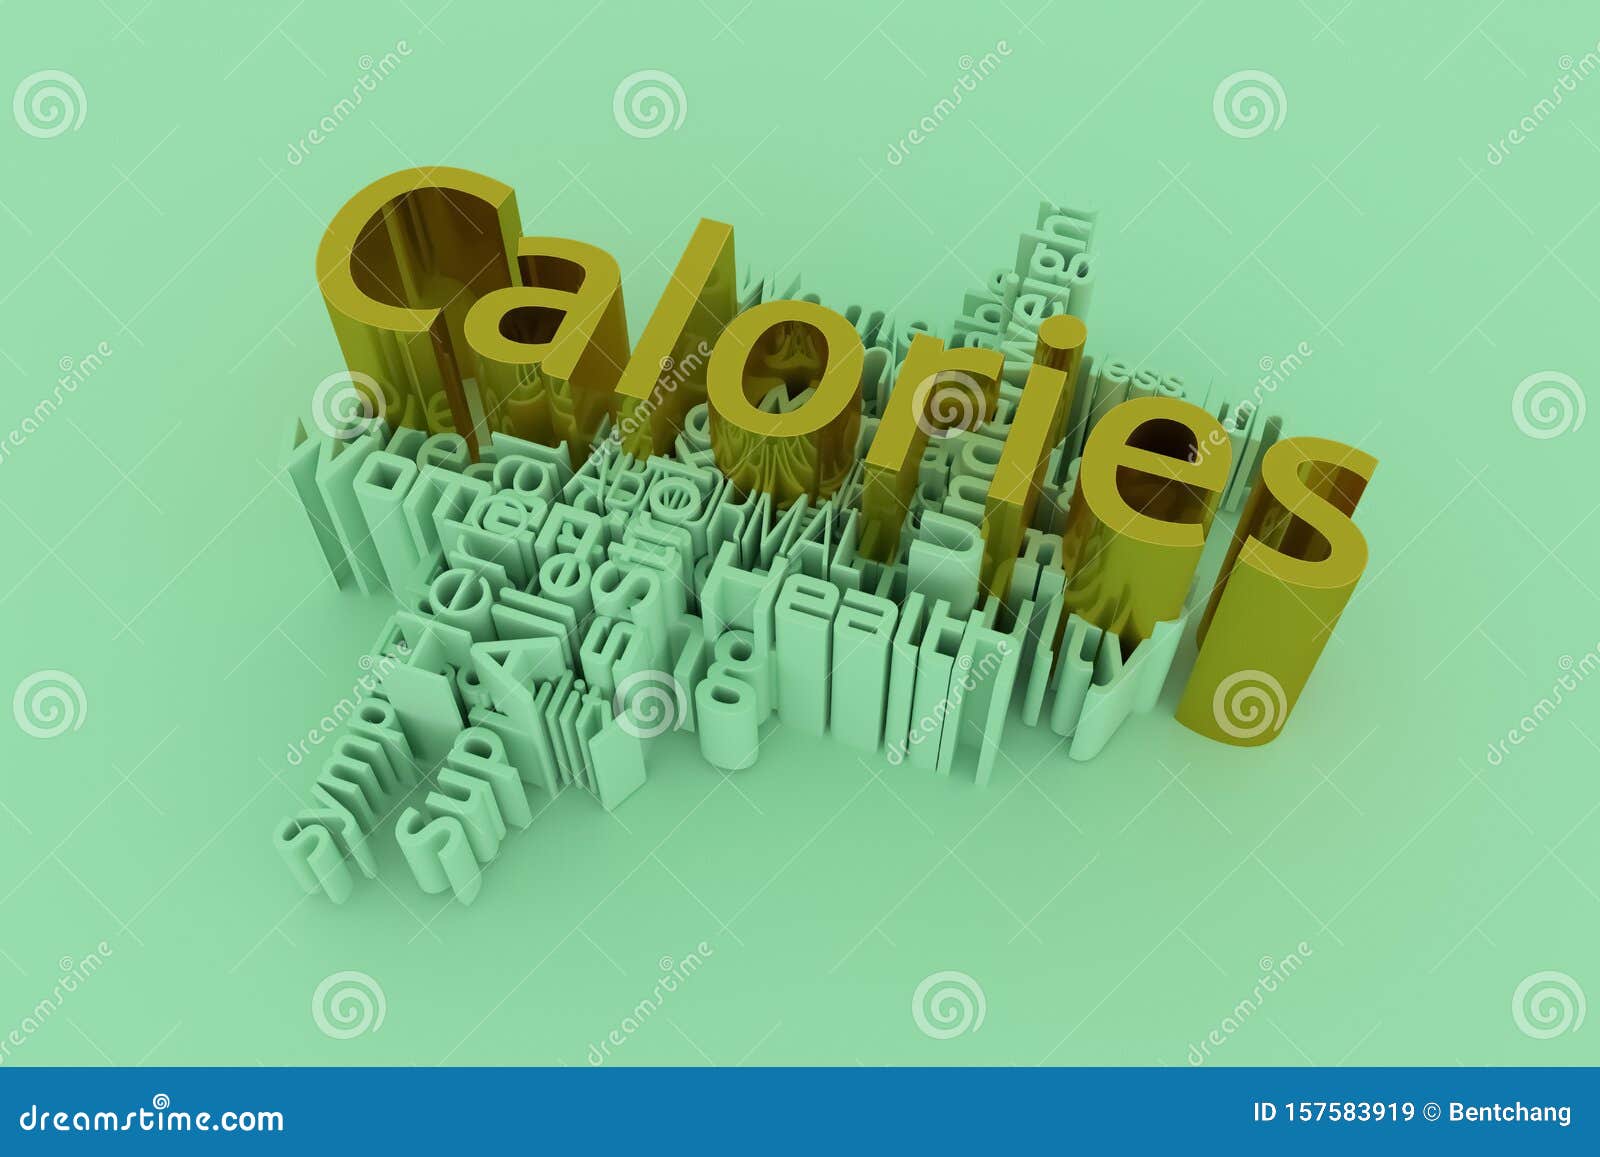 calories, health, lifestyle keyword words cloud. for graphic , texture or background. 3d rendering.